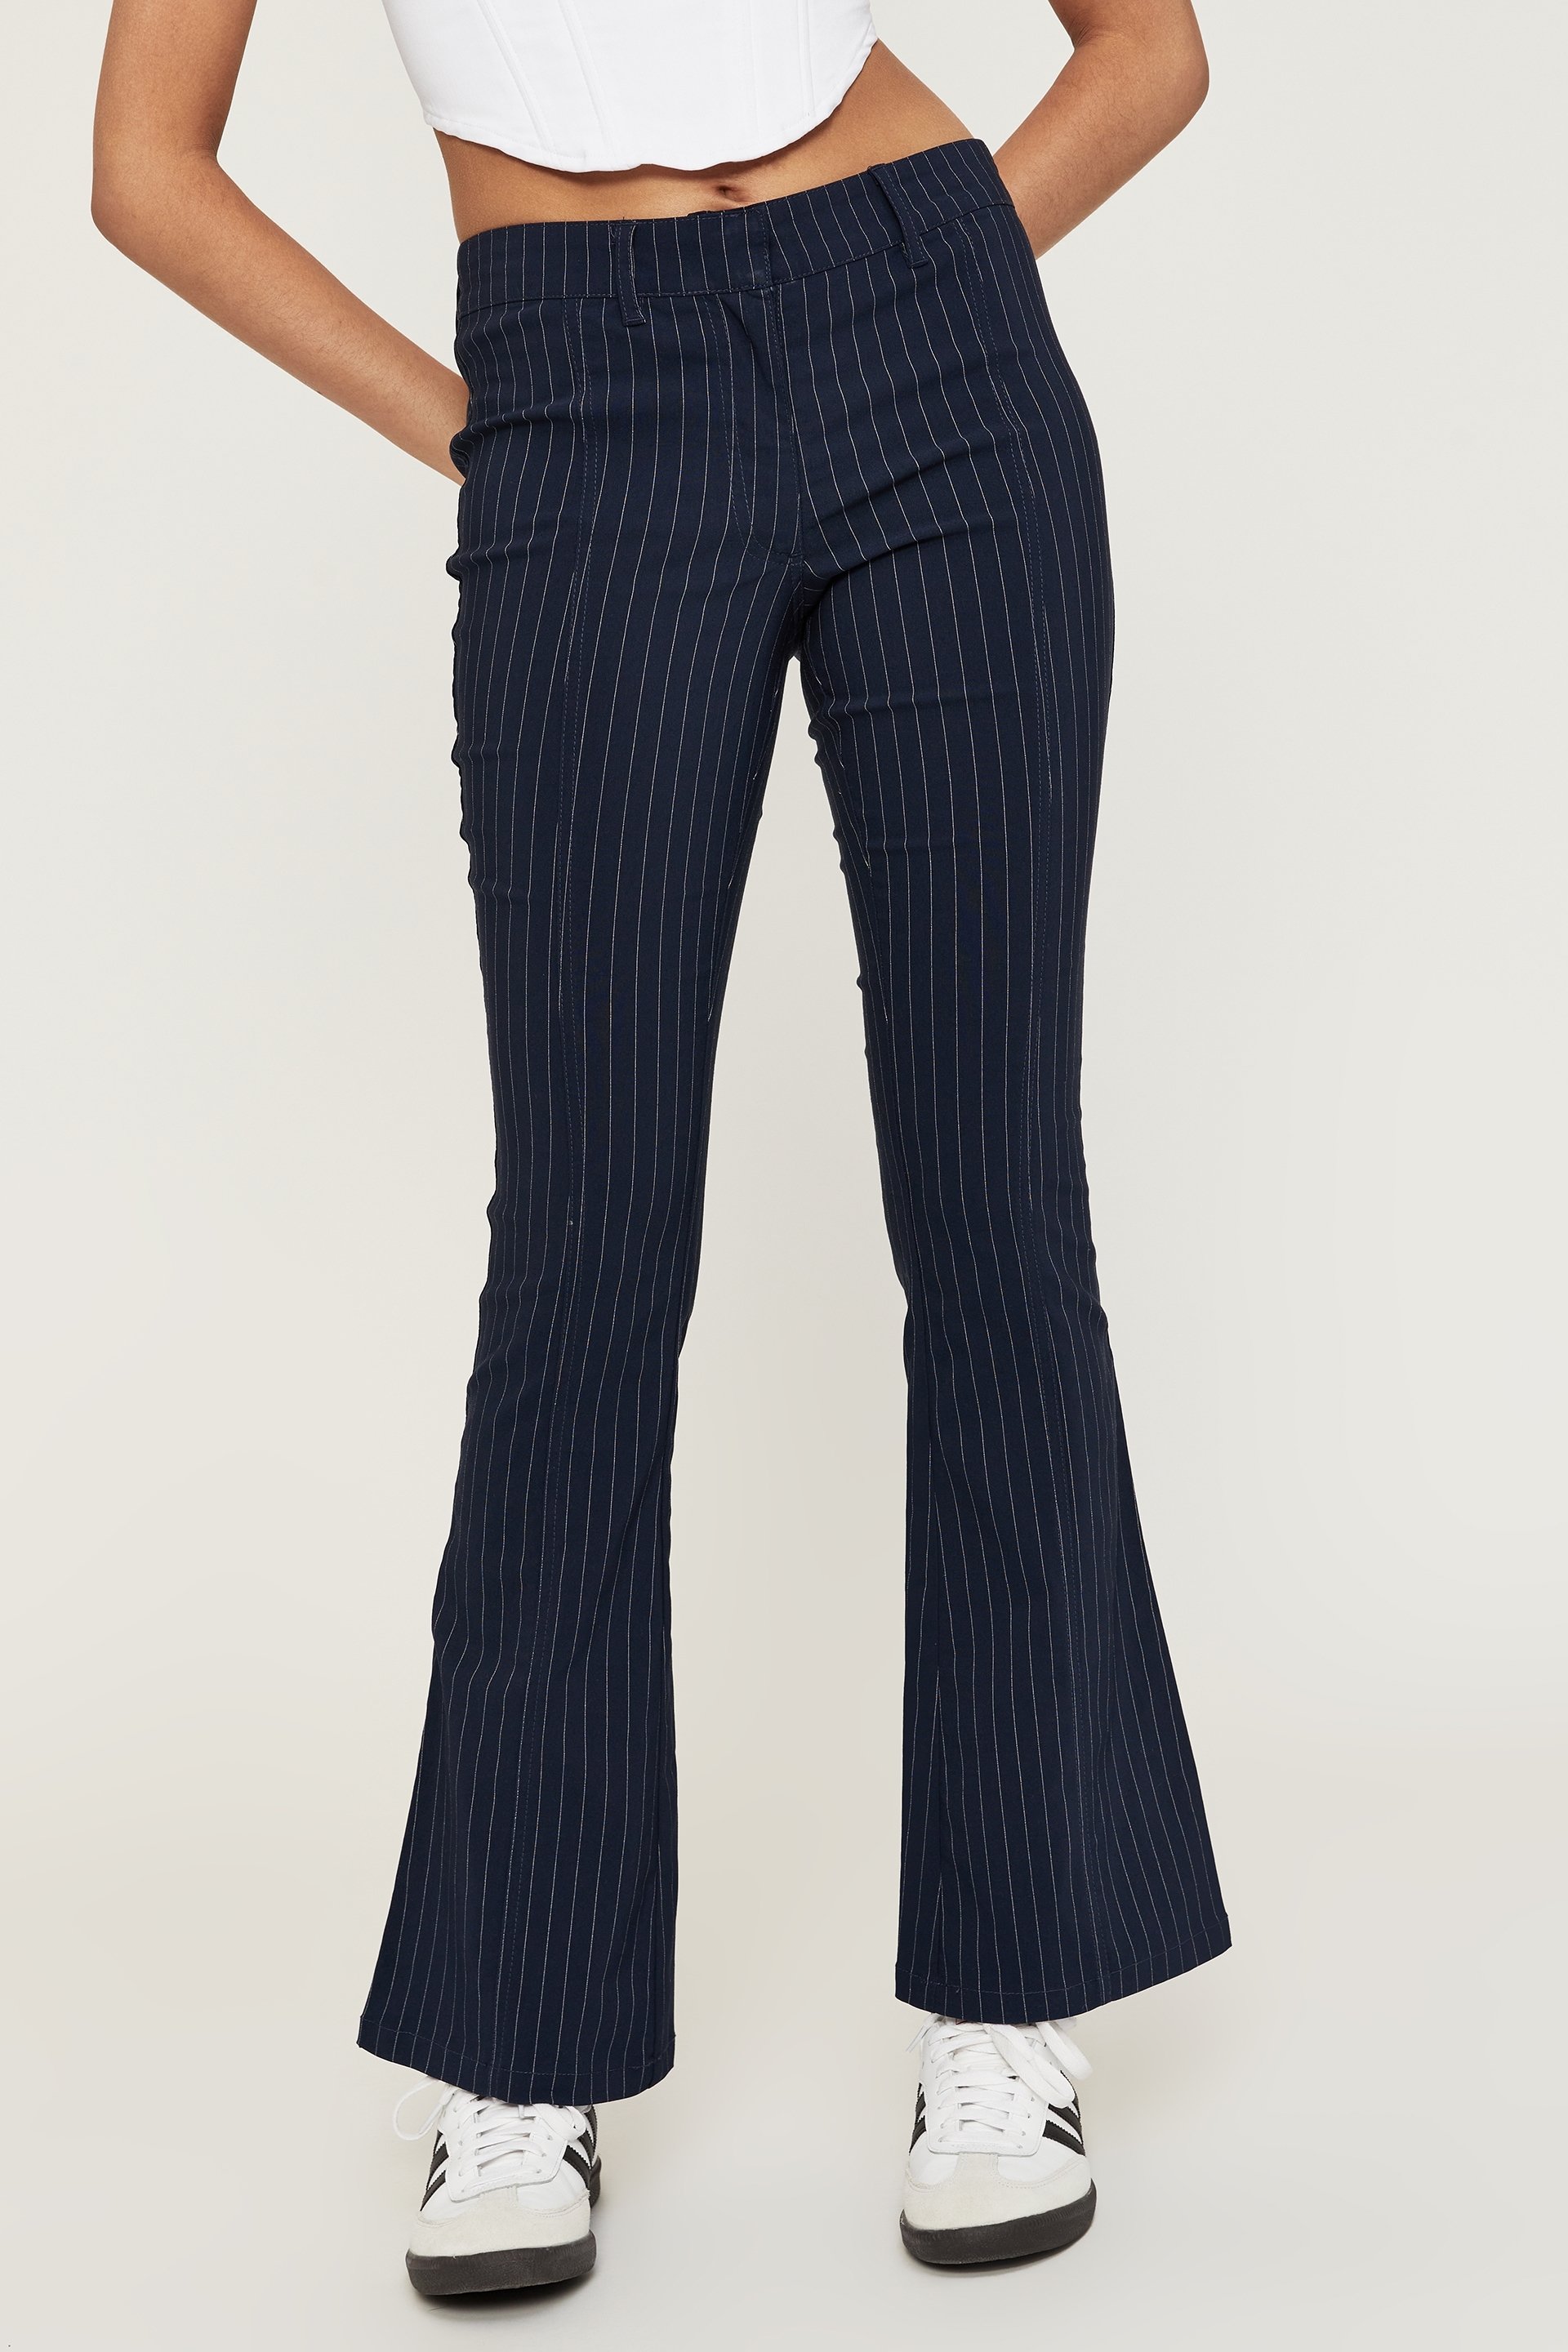 Shop Striped Flare Pants for Women from latest collection at Forever 21   323074